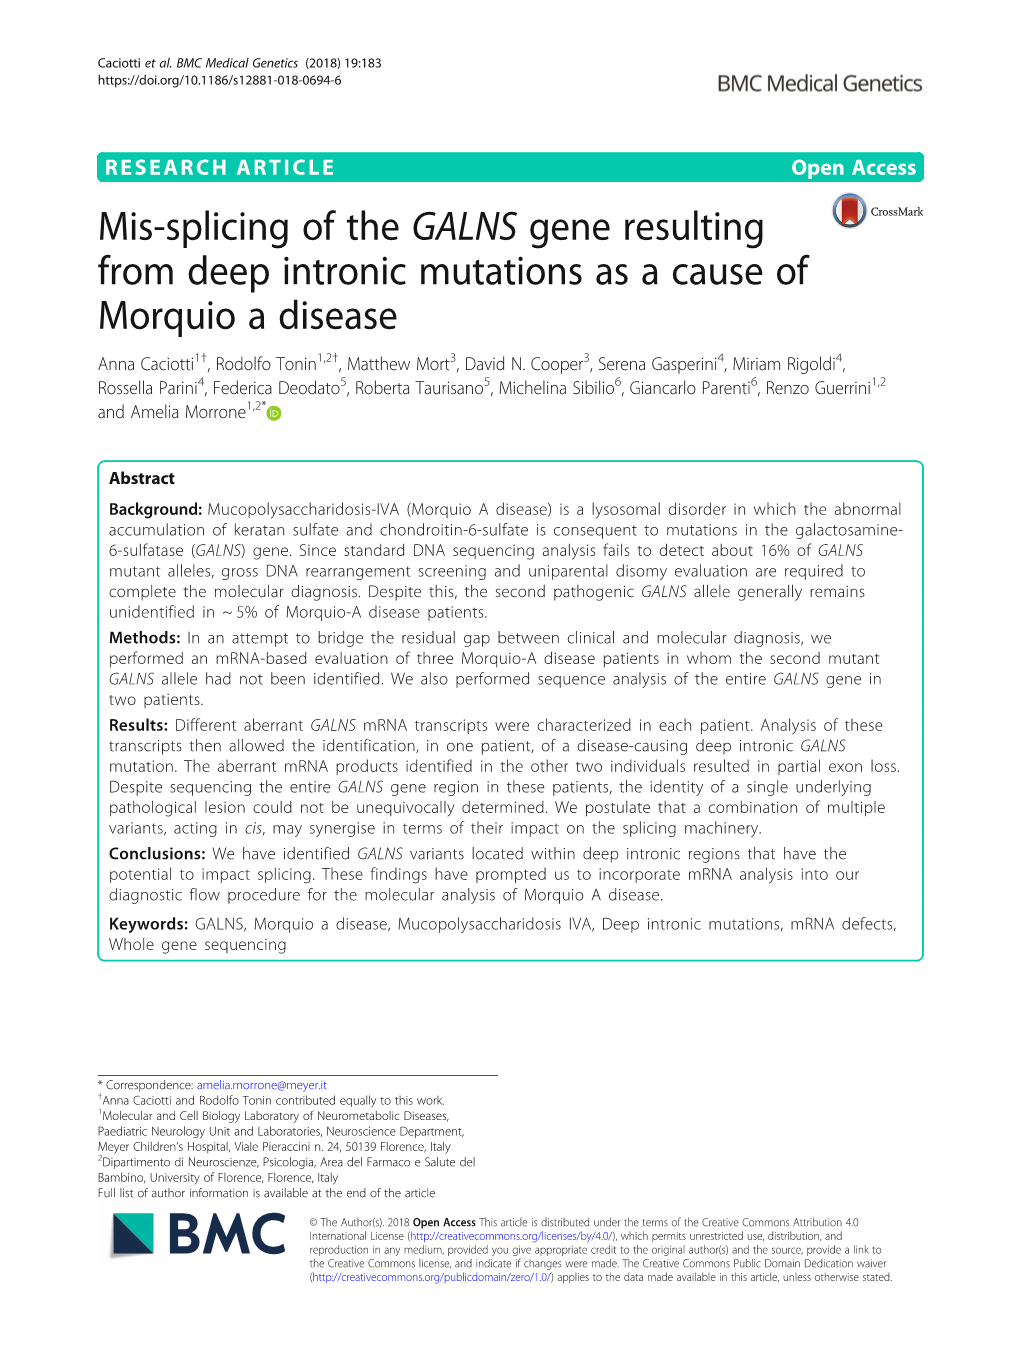 Mis-Splicing of the GALNS Gene Resulting from Deep Intronic Mutations As a Cause of Morquio a Disease Anna Caciotti1†, Rodolfo Tonin1,2†, Matthew Mort3, David N